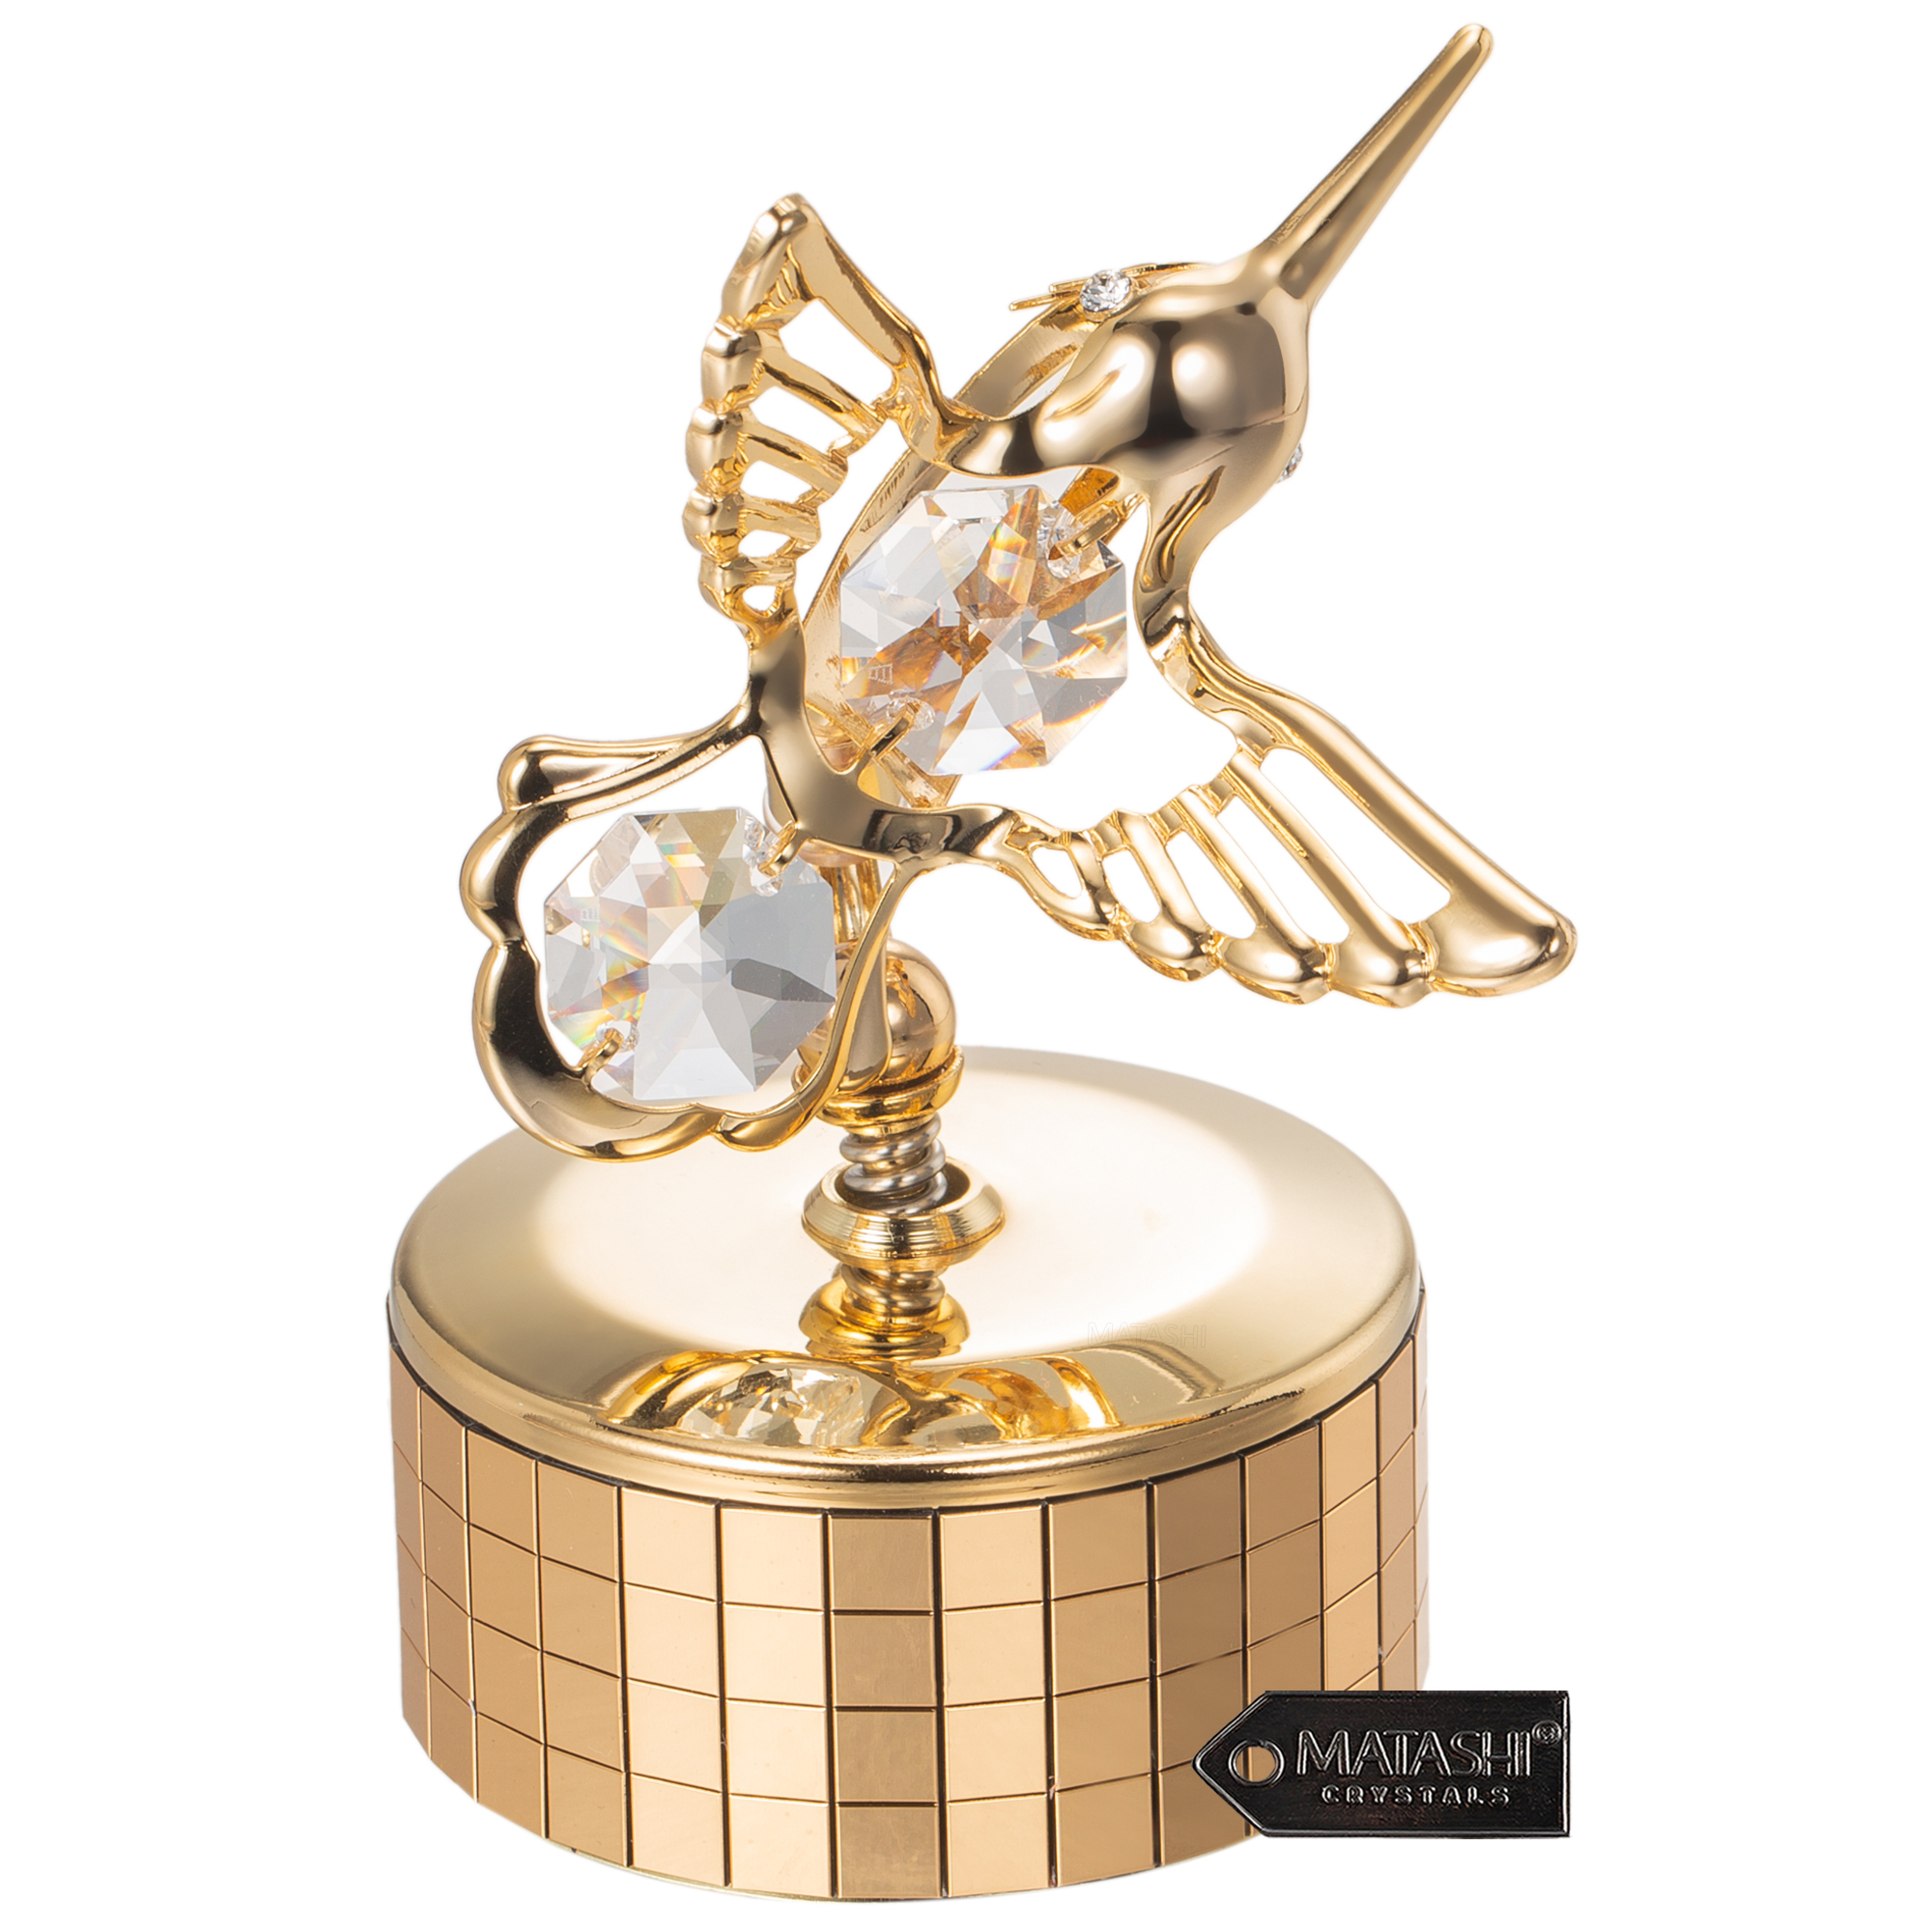 Best Mother's Day Gift Matashi 24K Gold Plated Music Box Plays Swan Lake With Hummingbird Figurine #1 Gift For Mom From Daughter, Son